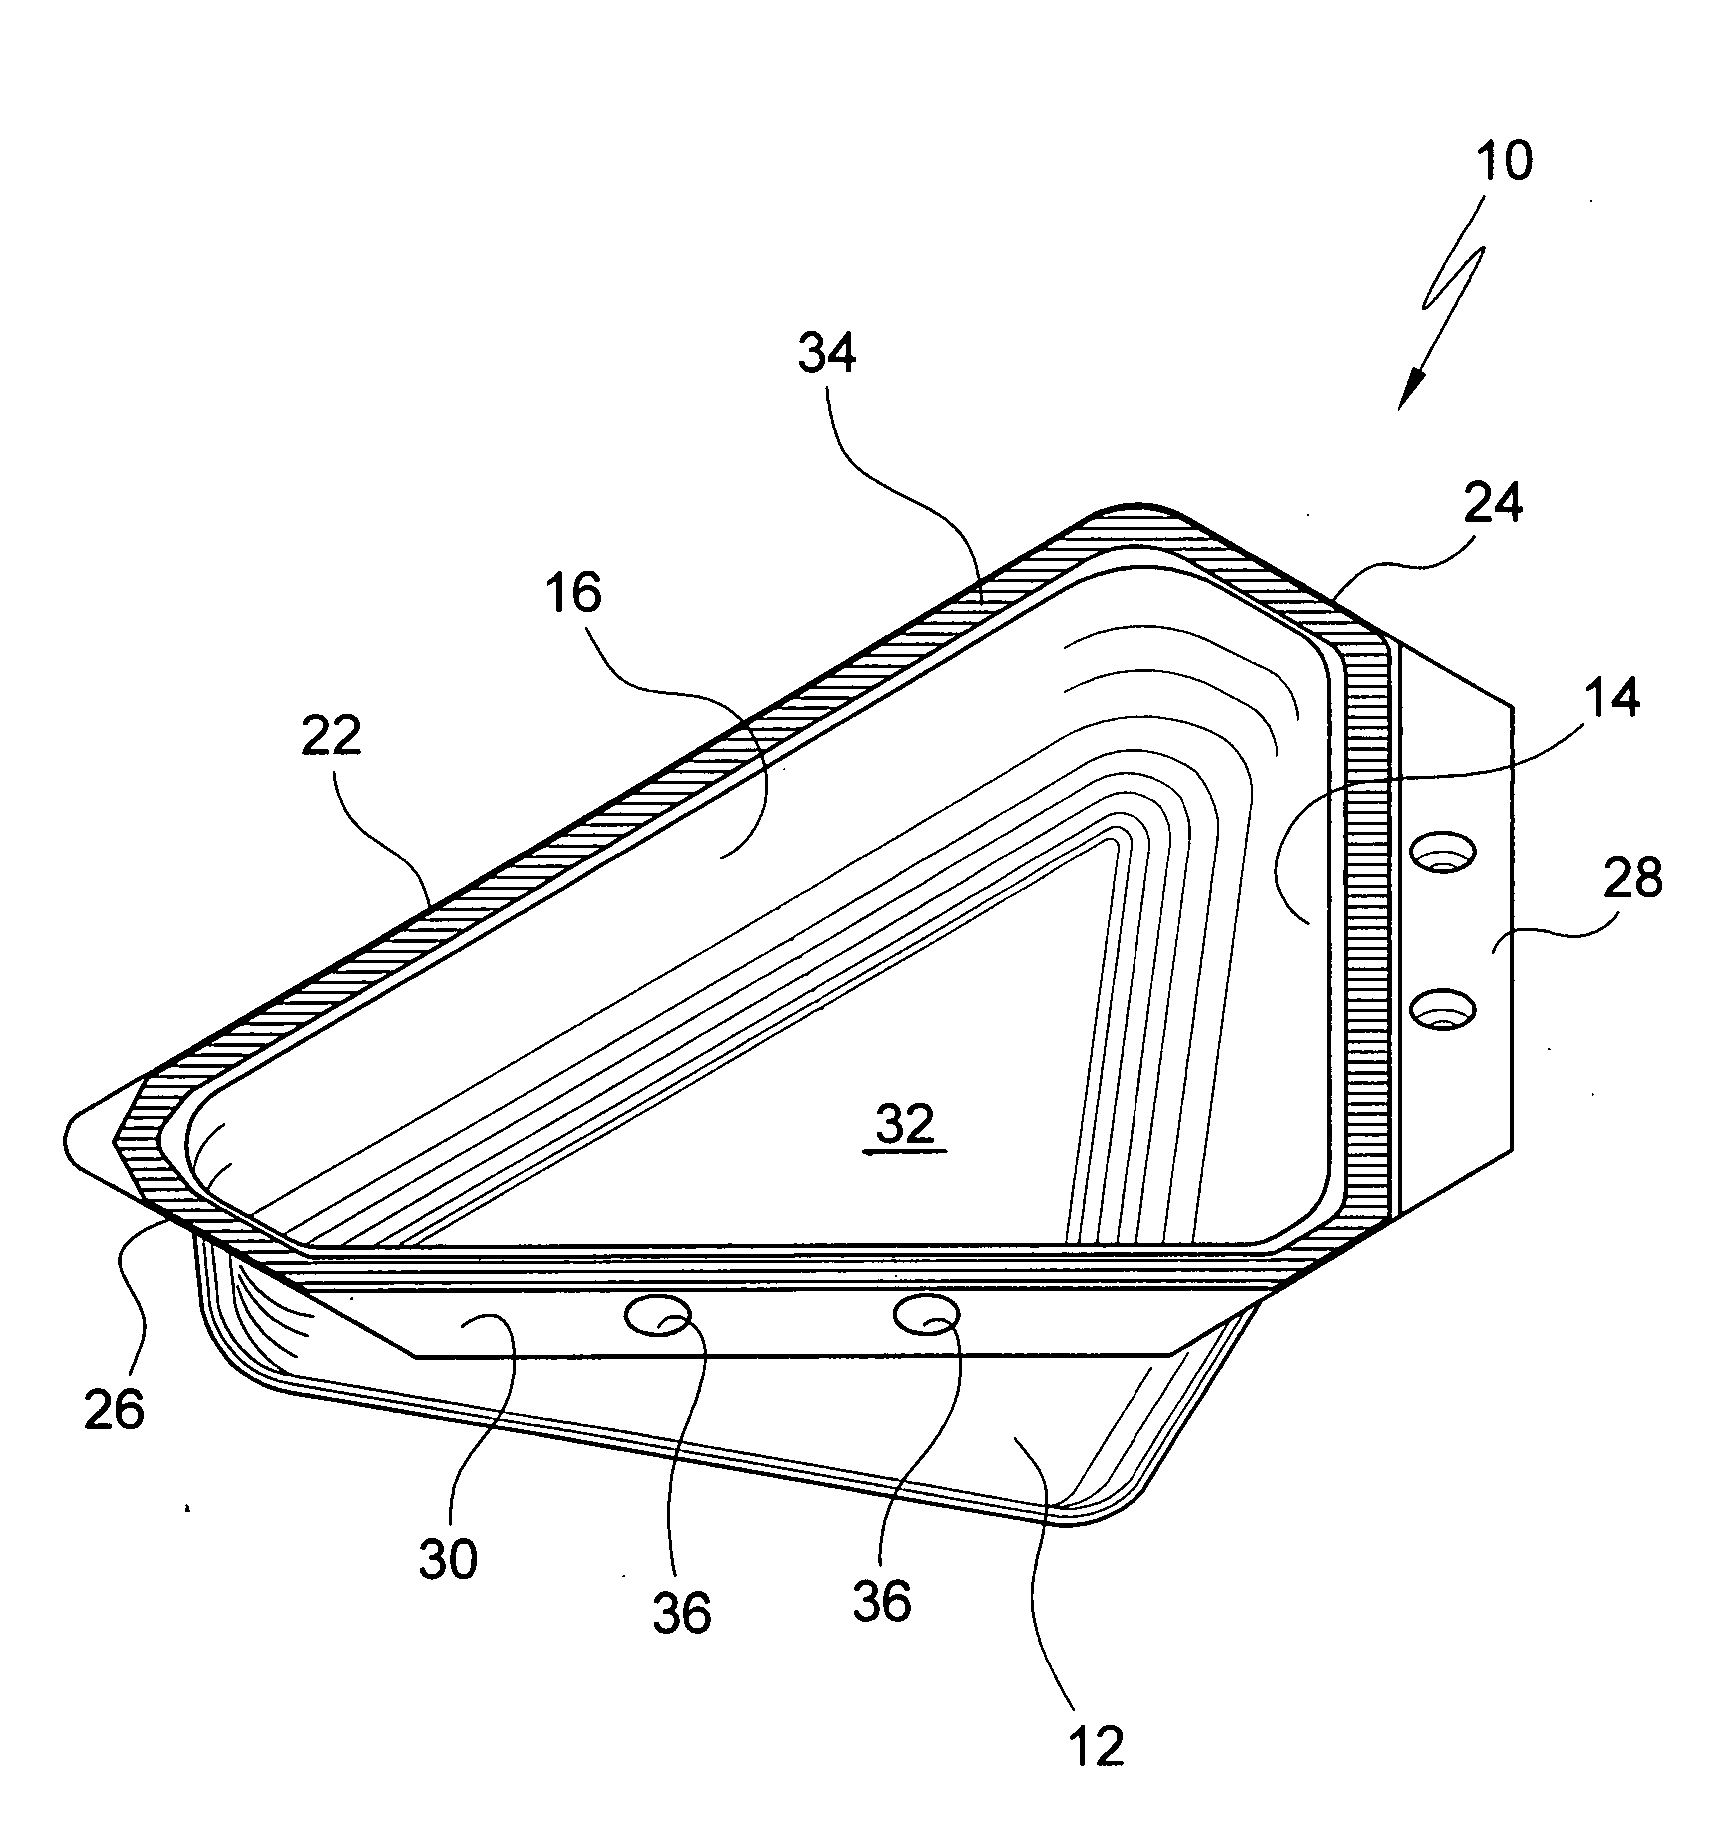 Food container particularly for forming a party platter or the like